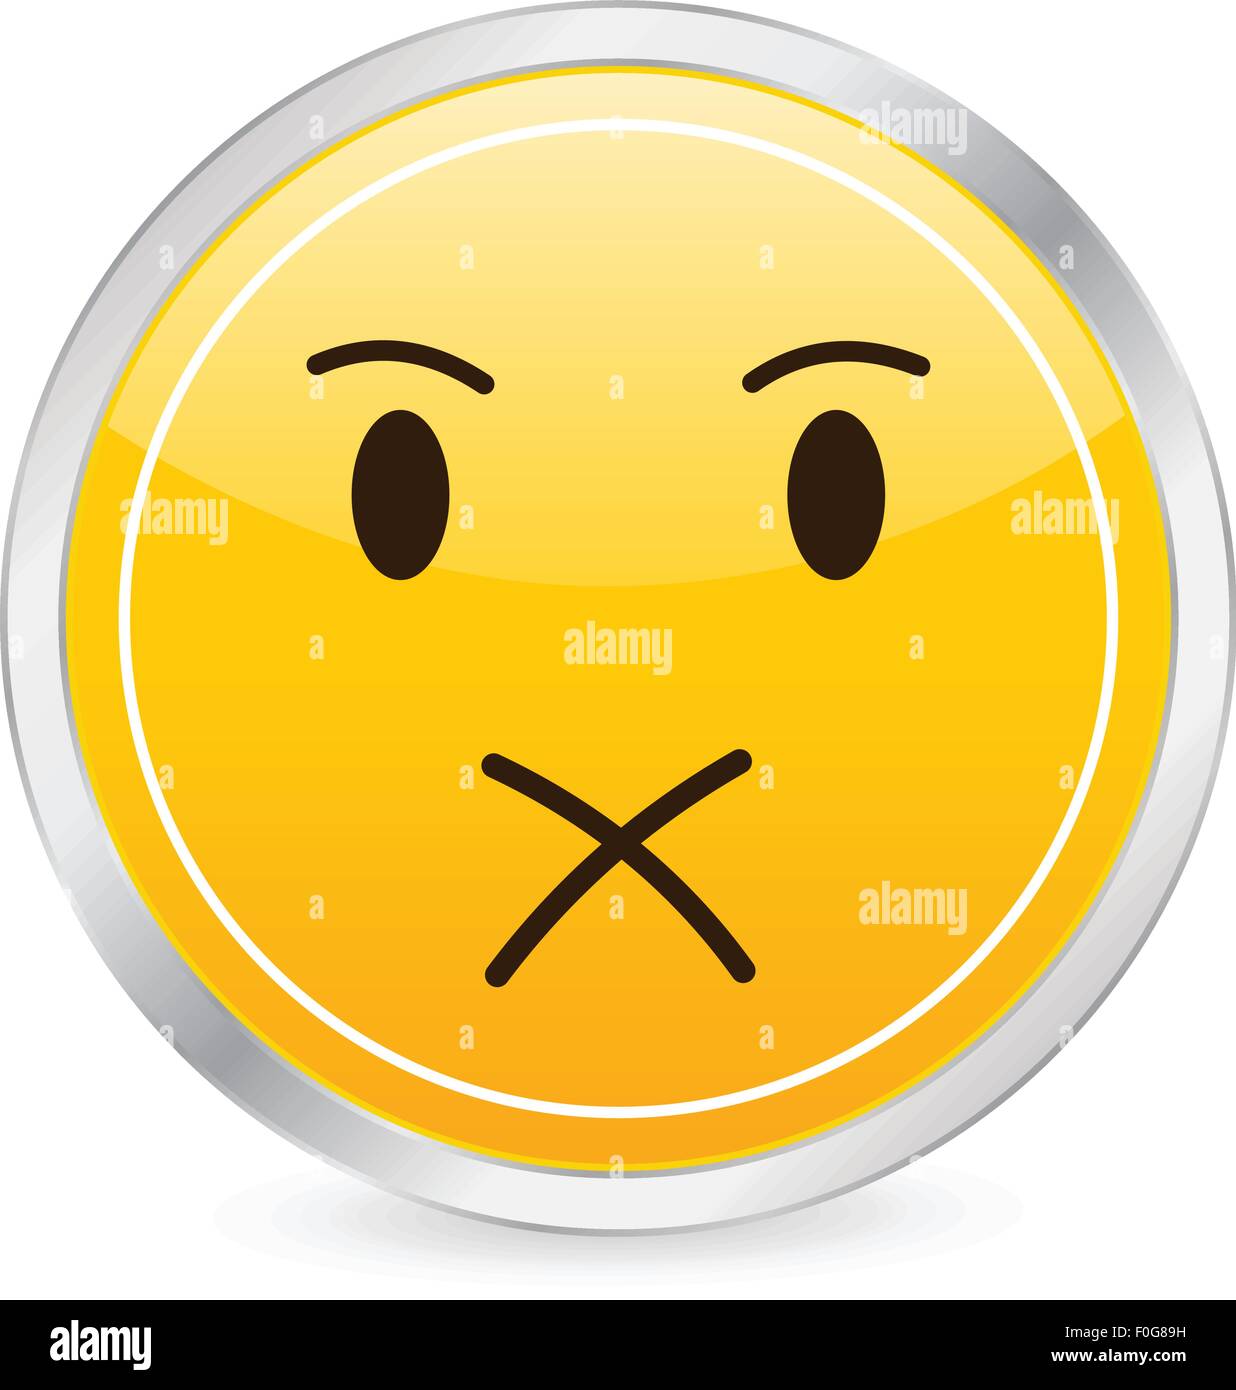 Shut up face yellow circle icon on a white background. Vector illustration. Stock Vector